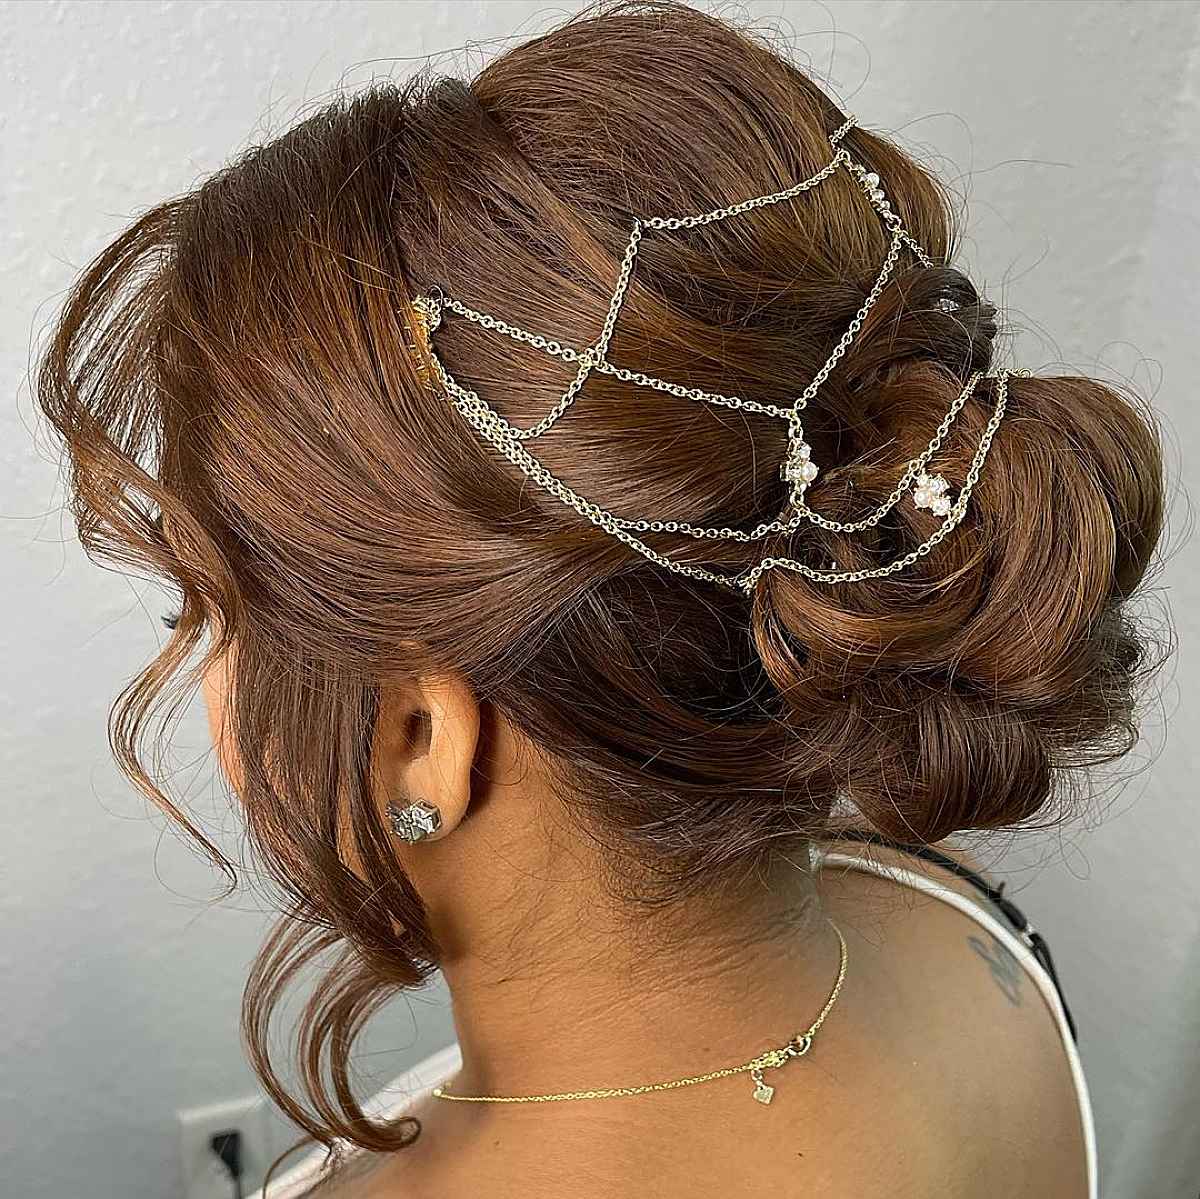 Curled Bun Updo with Hair Chains